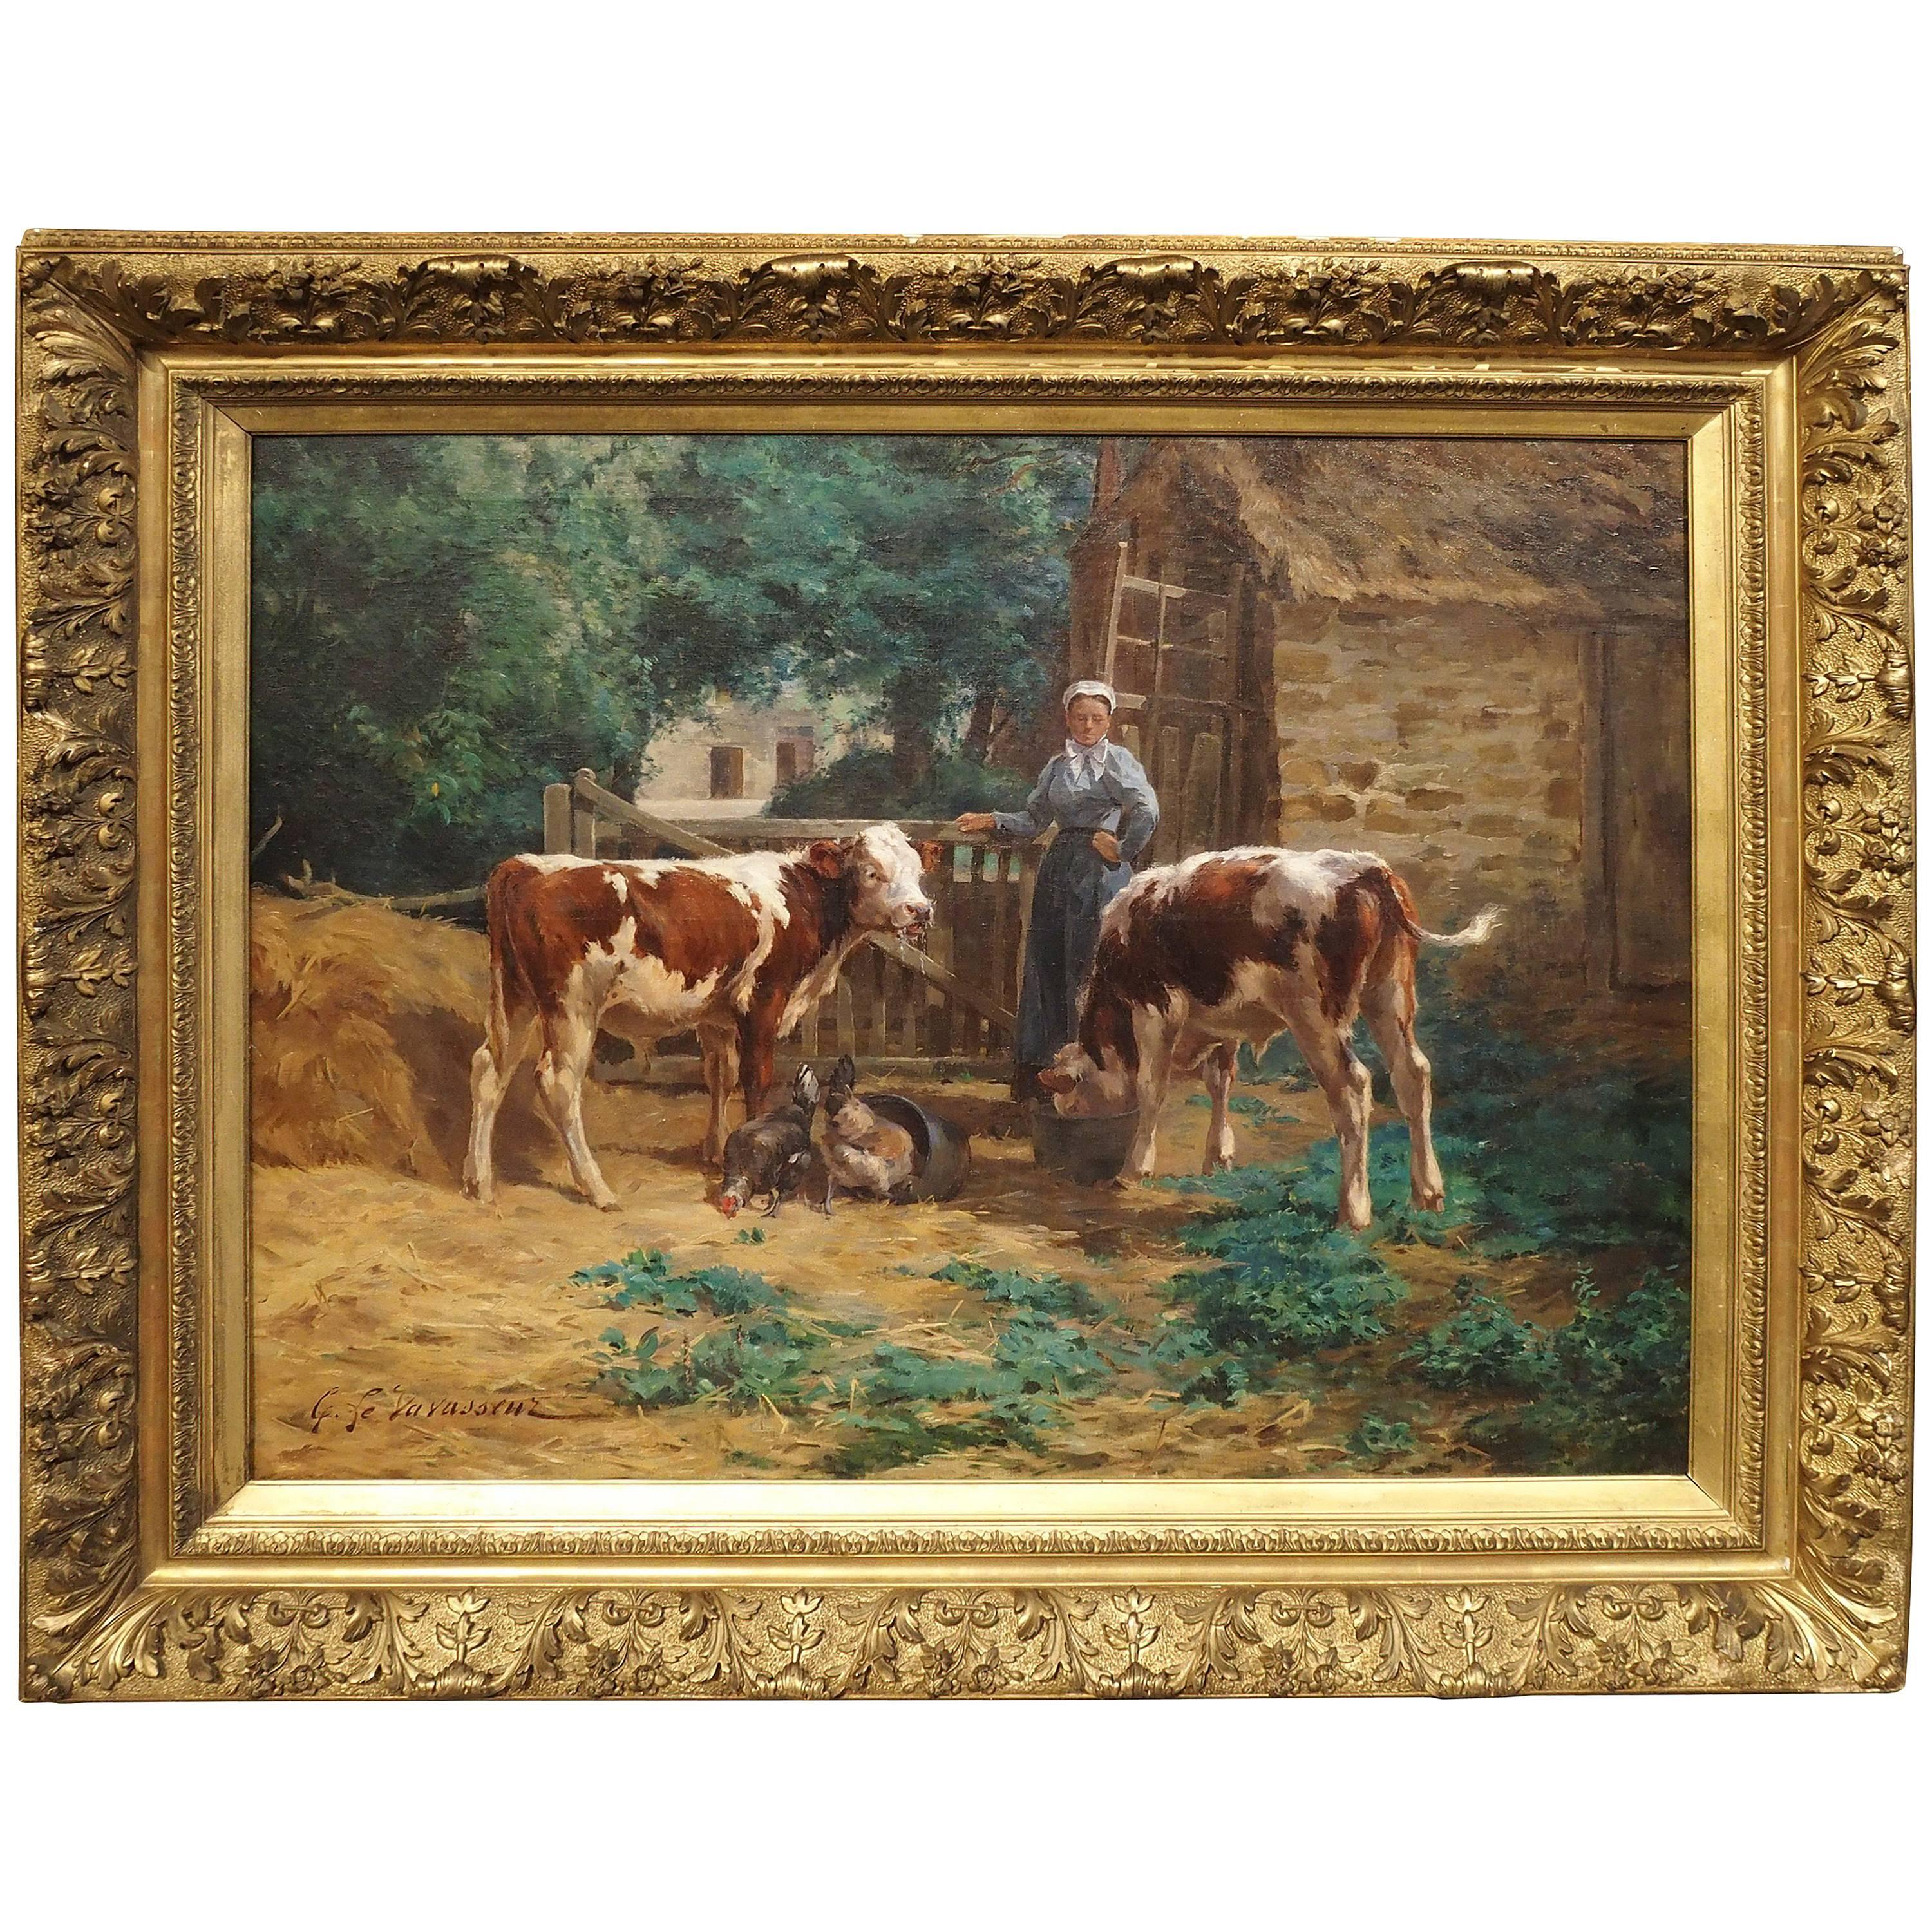 Large Antique French Oil on Canvas, a Farm Scene by Le Vavasseuer